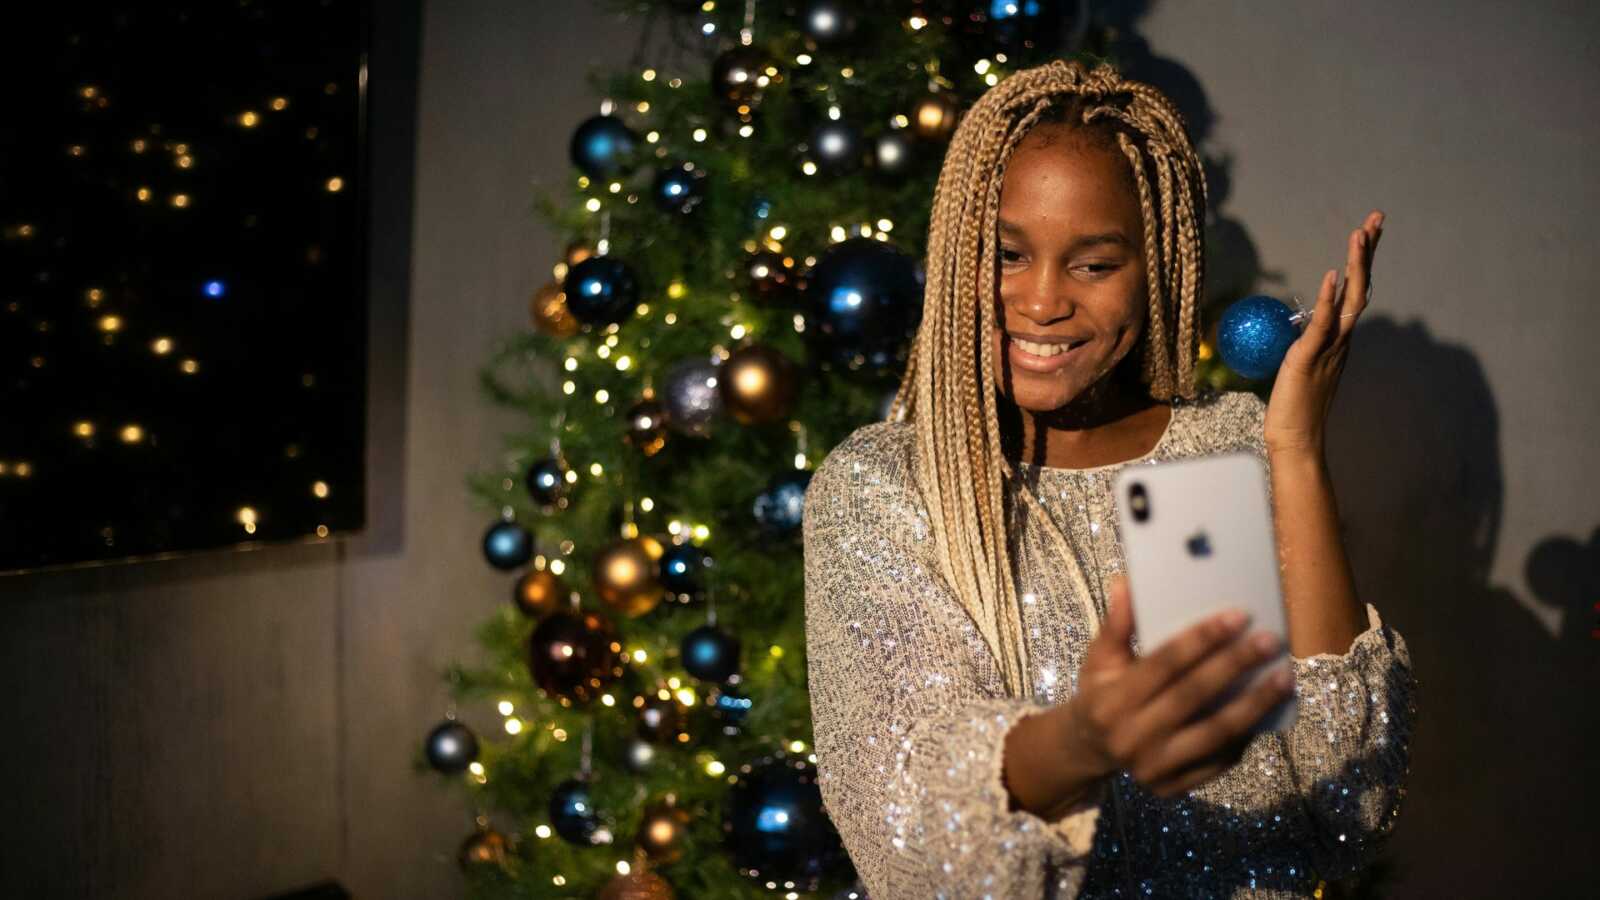 a woman chats on a facetime call on her phone in front of a decorated Christmas tree